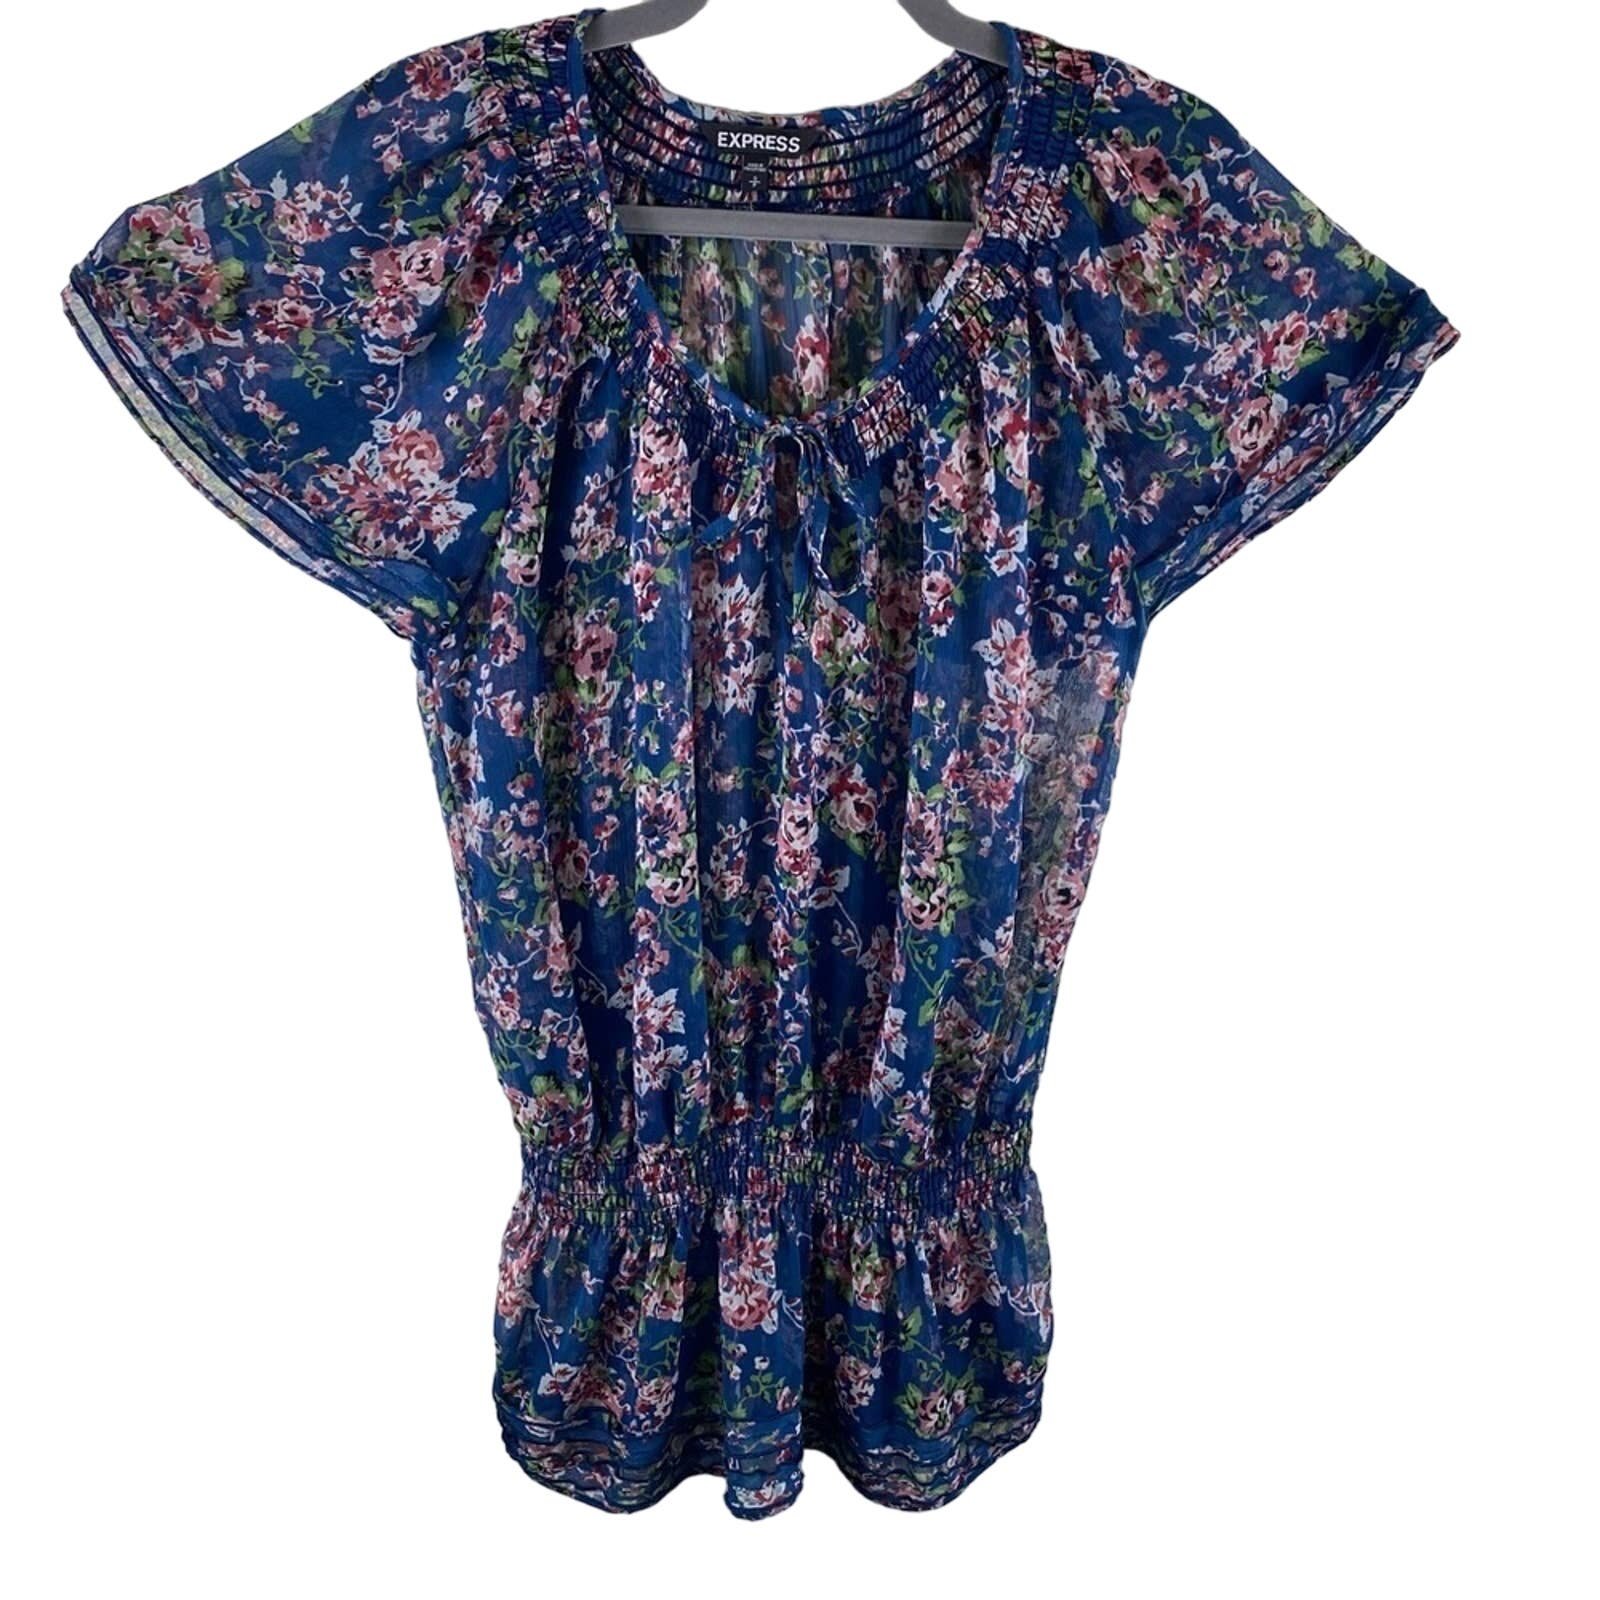 reasonable price Express Floral Print Flutter Sleeve Round Neck Sheer Lighweight Blouse Size S PifbA5jWW no tax